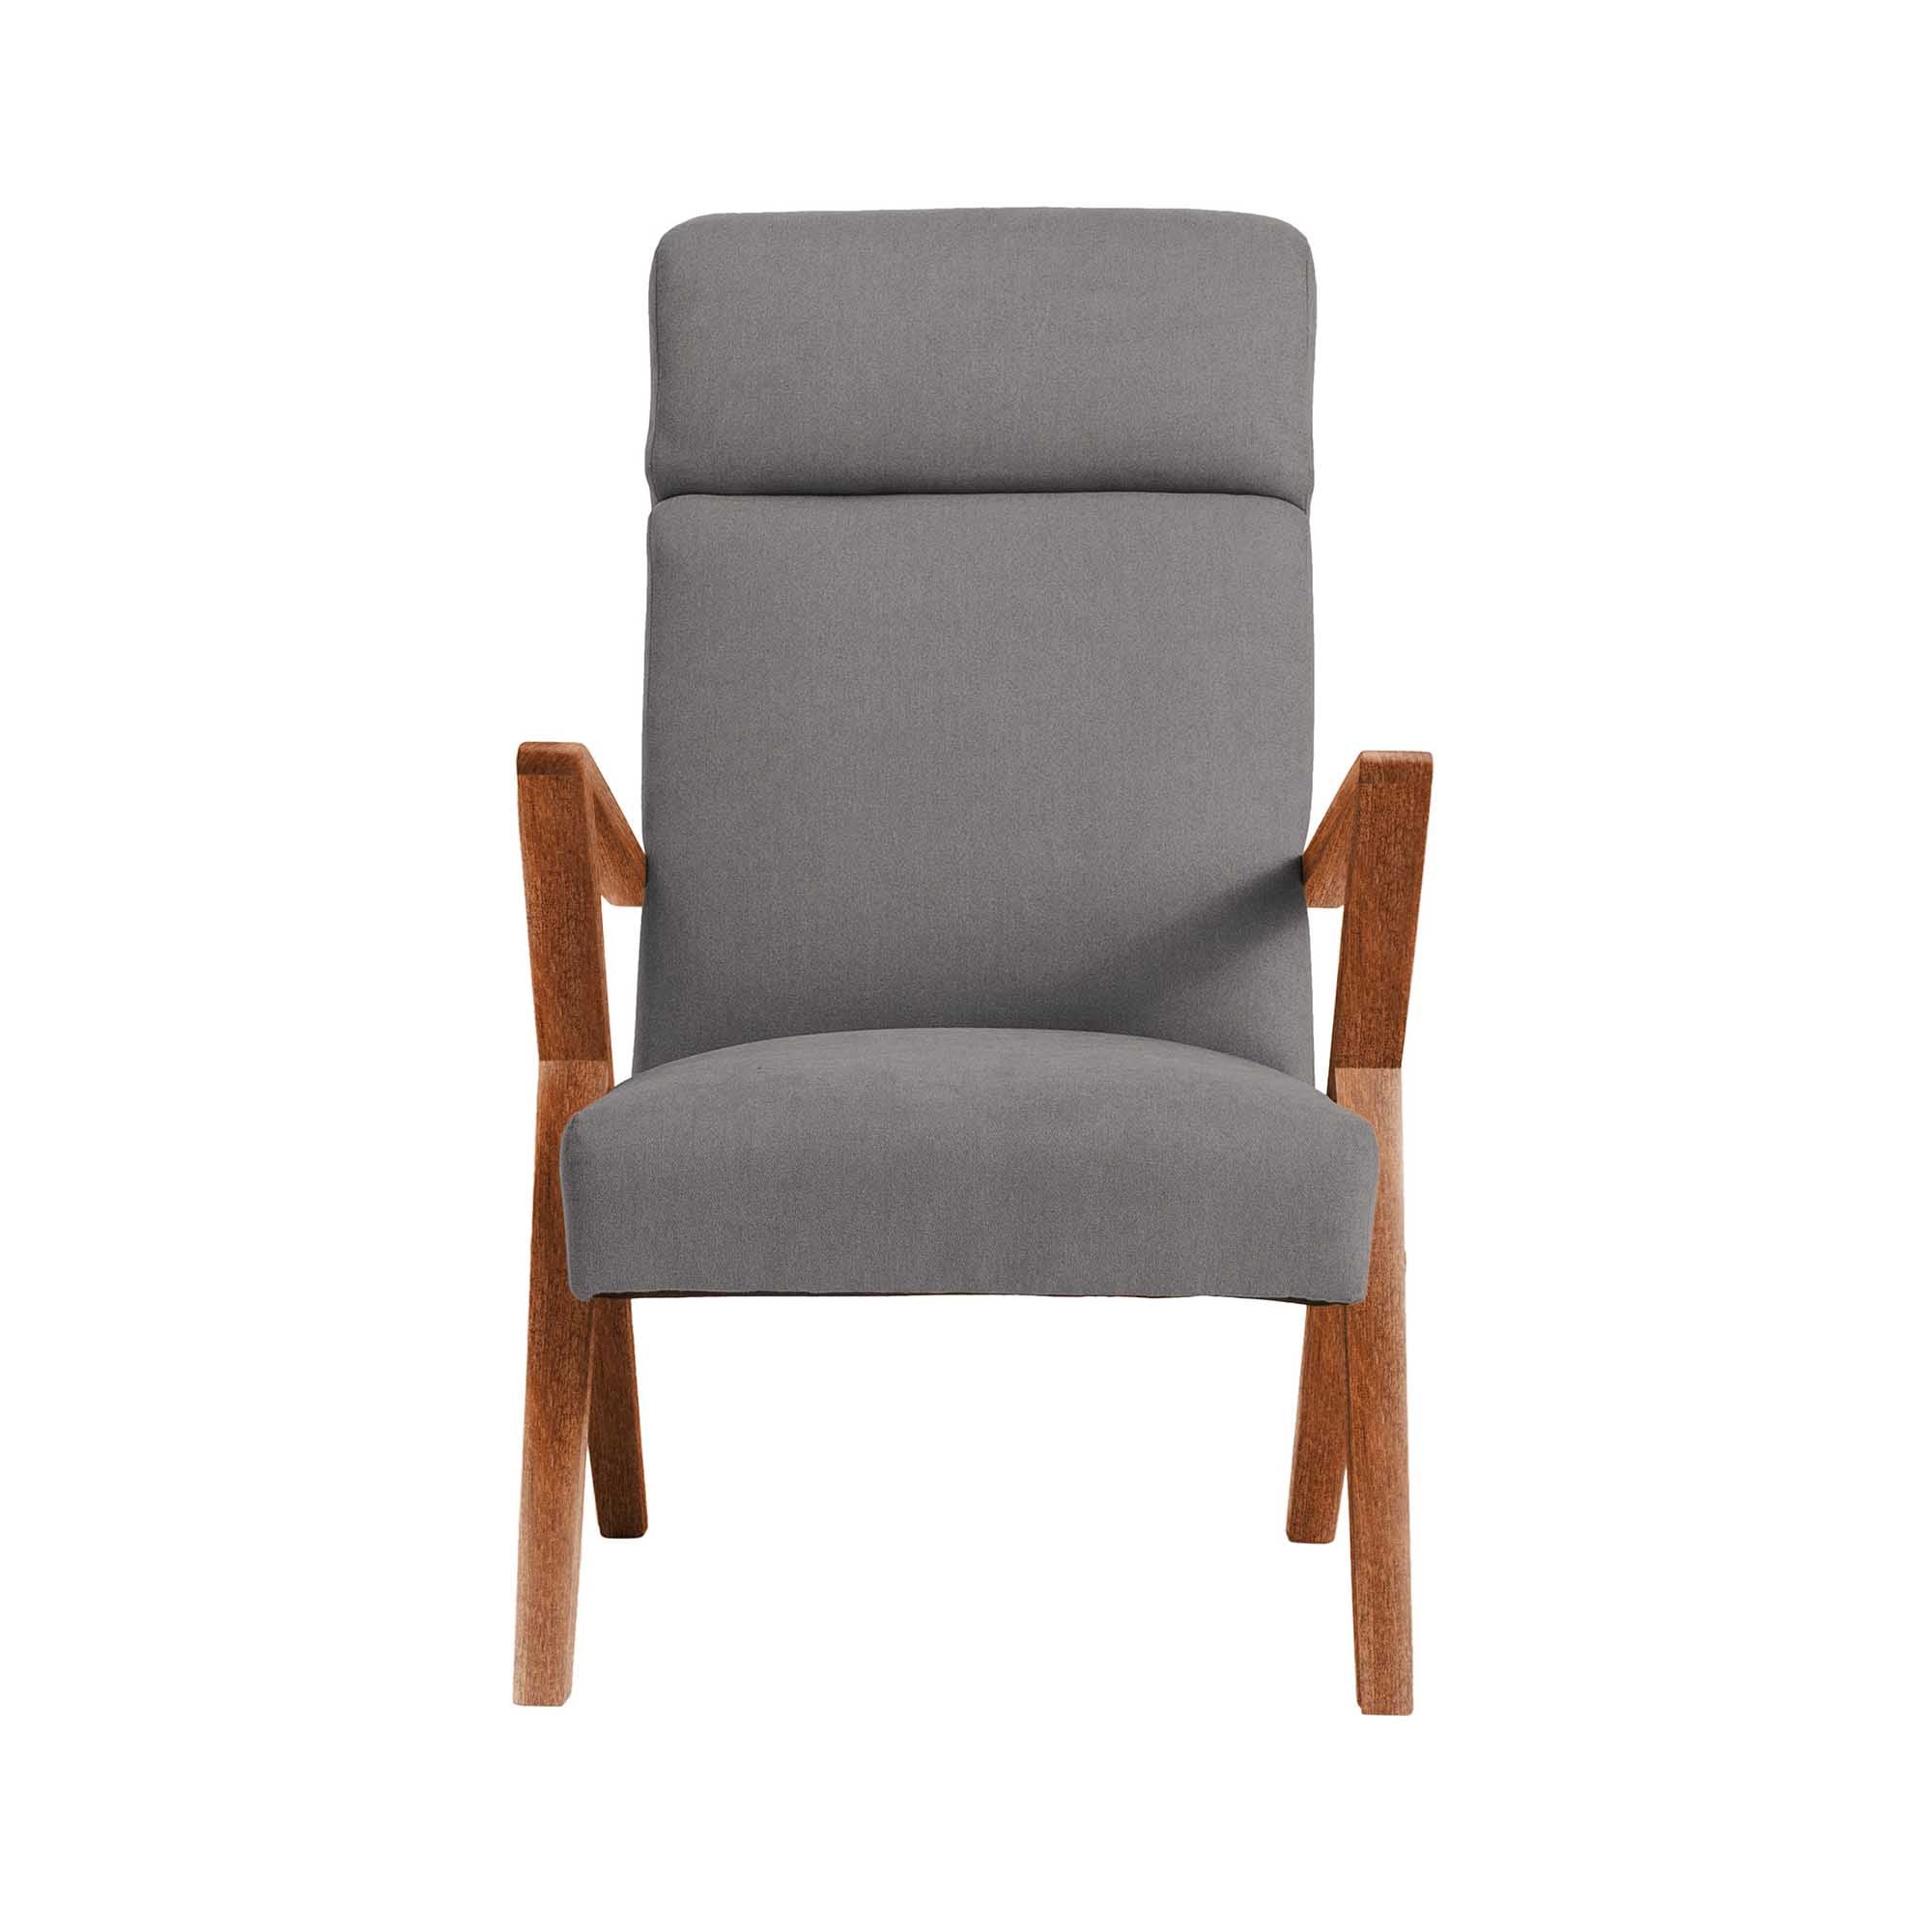 Lounge Chair, Beech Wood Frame, Walnut Colour grey fabric, front view